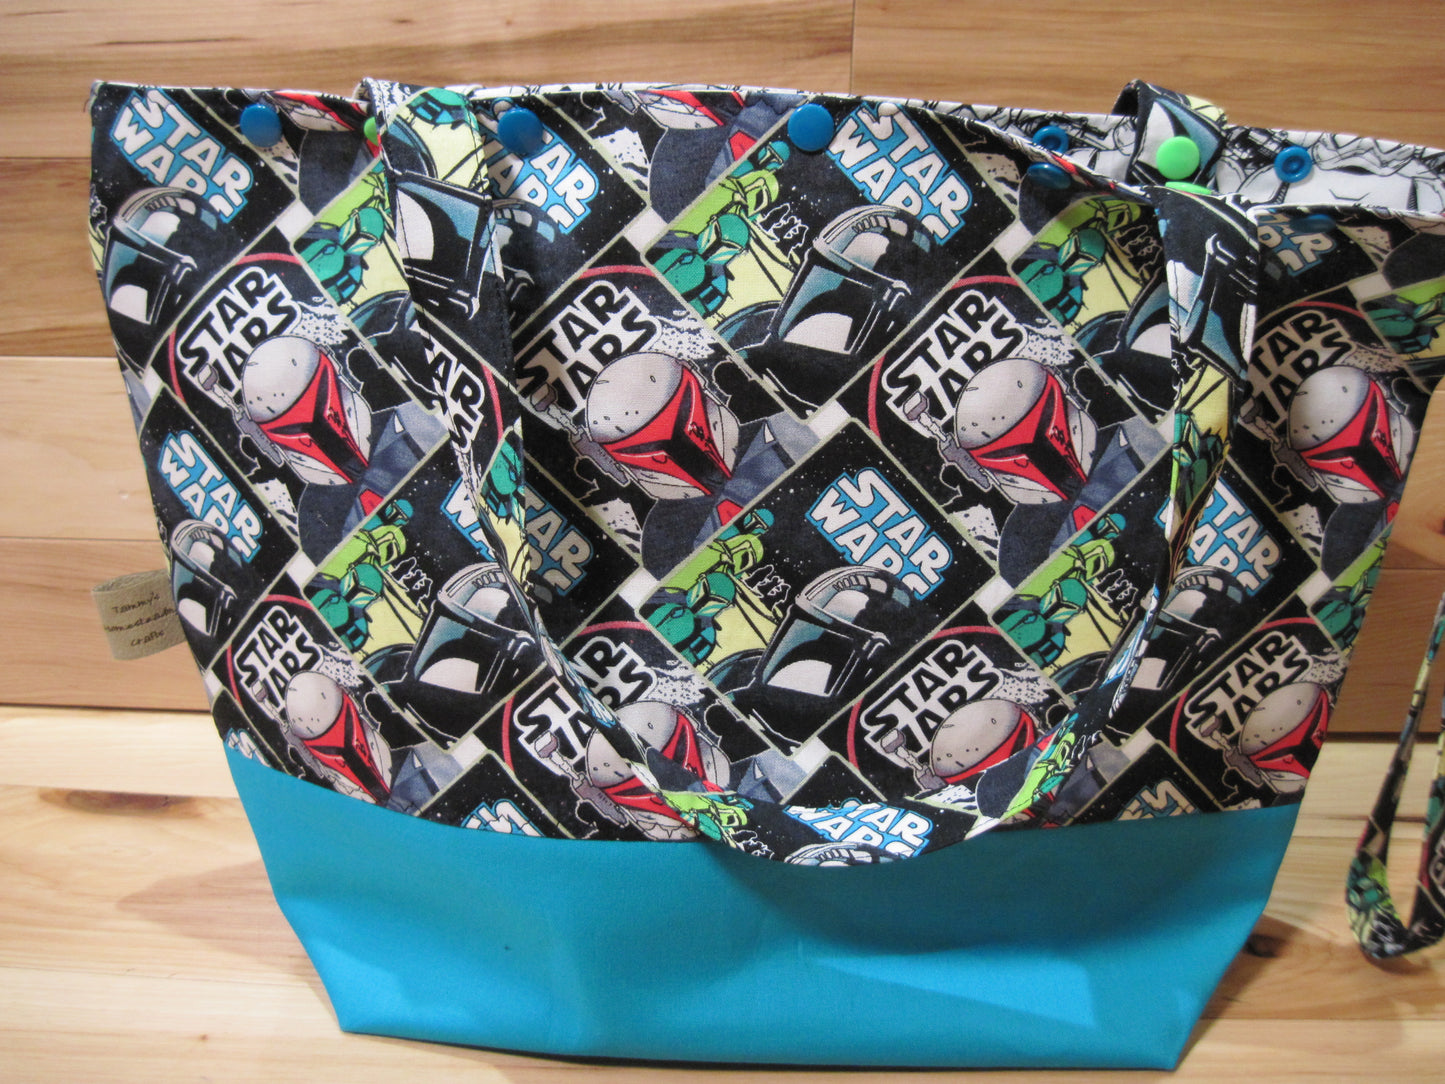 X-Large Star Wars w/teal, snaps, & removable handles project bag